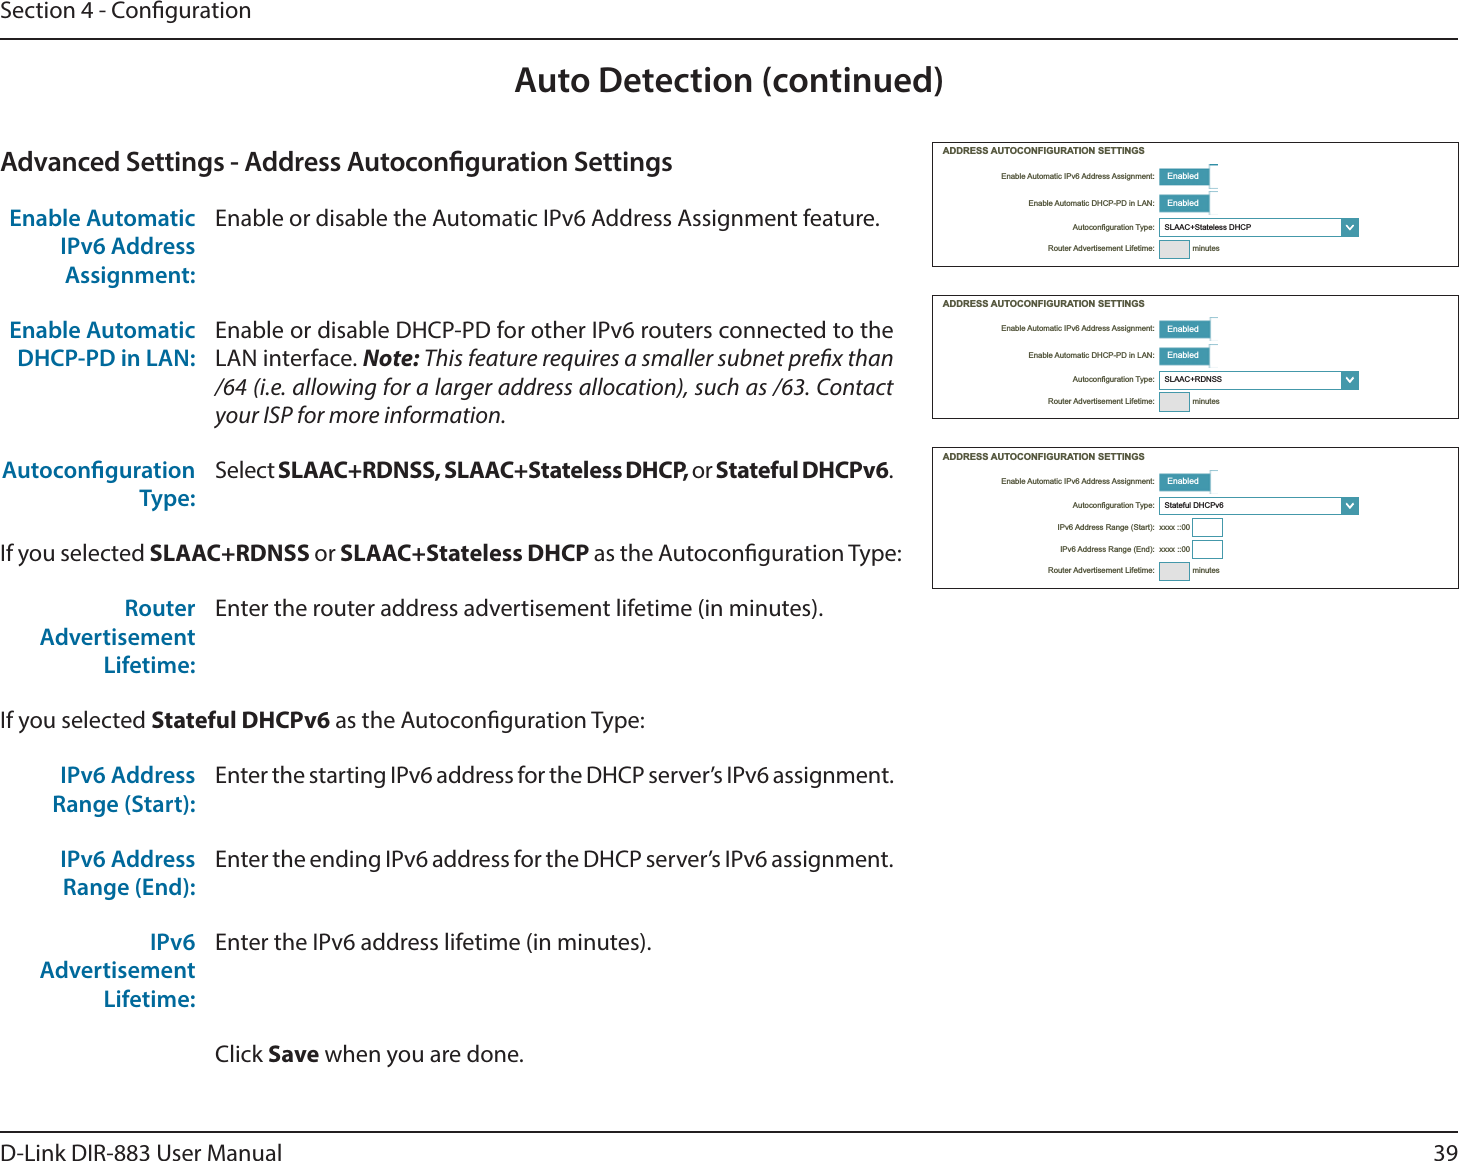 39D-Link DIR-883 User ManualSection 4 - CongurationAuto Detection (continued) Enabled Enabled ໹ minutes Enabled Enabled ໹ minutes Enabled ໹   minutesAdvanced Settings - Address Autoconguration SettingsEnable Automatic IPv6 Address Assignment:Enable or disable the Automatic IPv6 Address Assignment feature.Enable Automatic DHCP-PD in LAN:Enable or disable DHCP-PD for other IPv6 routers connected to the LAN interface. Note: This feature requires a smaller subnet prex than /64 (i.e. allowing for a larger address allocation), such as /63. Contact your ISP for more information.Autoconguration Type:Select SLAAC+RDNSS, SLAAC+Stateless DHCP, or Stateful DHCPv6.If you selected SLAAC+RDNSS or SLAAC+Stateless DHCP as the Autoconguration Type:Router Advertisement Lifetime:Enter the router address advertisement lifetime (in minutes).If you selected Stateful DHCPv6 as the Autoconguration Type:IPv6 Address Range (Start):Enter the starting IPv6 address for the DHCP server’s IPv6 assignment.IPv6 Address Range (End):Enter the ending IPv6 address for the DHCP server’s IPv6 assignment.IPv6 Advertisement Lifetime:Enter the IPv6 address lifetime (in minutes).Click Save when you are done.